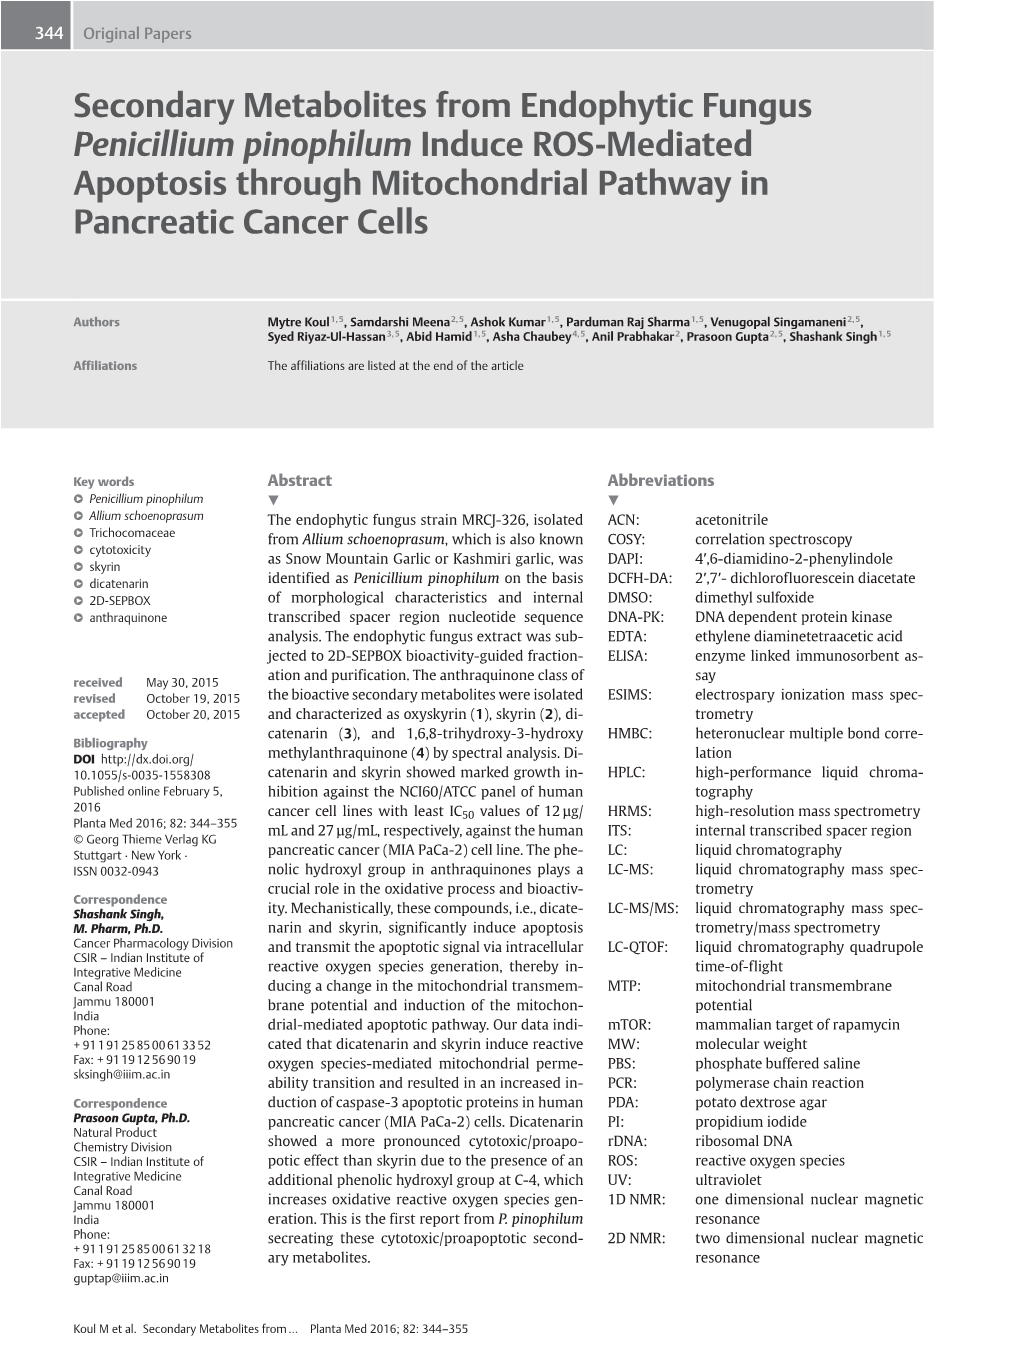 Secondary Metabolites from Endophytic Fungus Penicillium Pinophilum Induce ROS-Mediated Apoptosis Through Mitochondrial Pathway in Pancreatic Cancer Cells